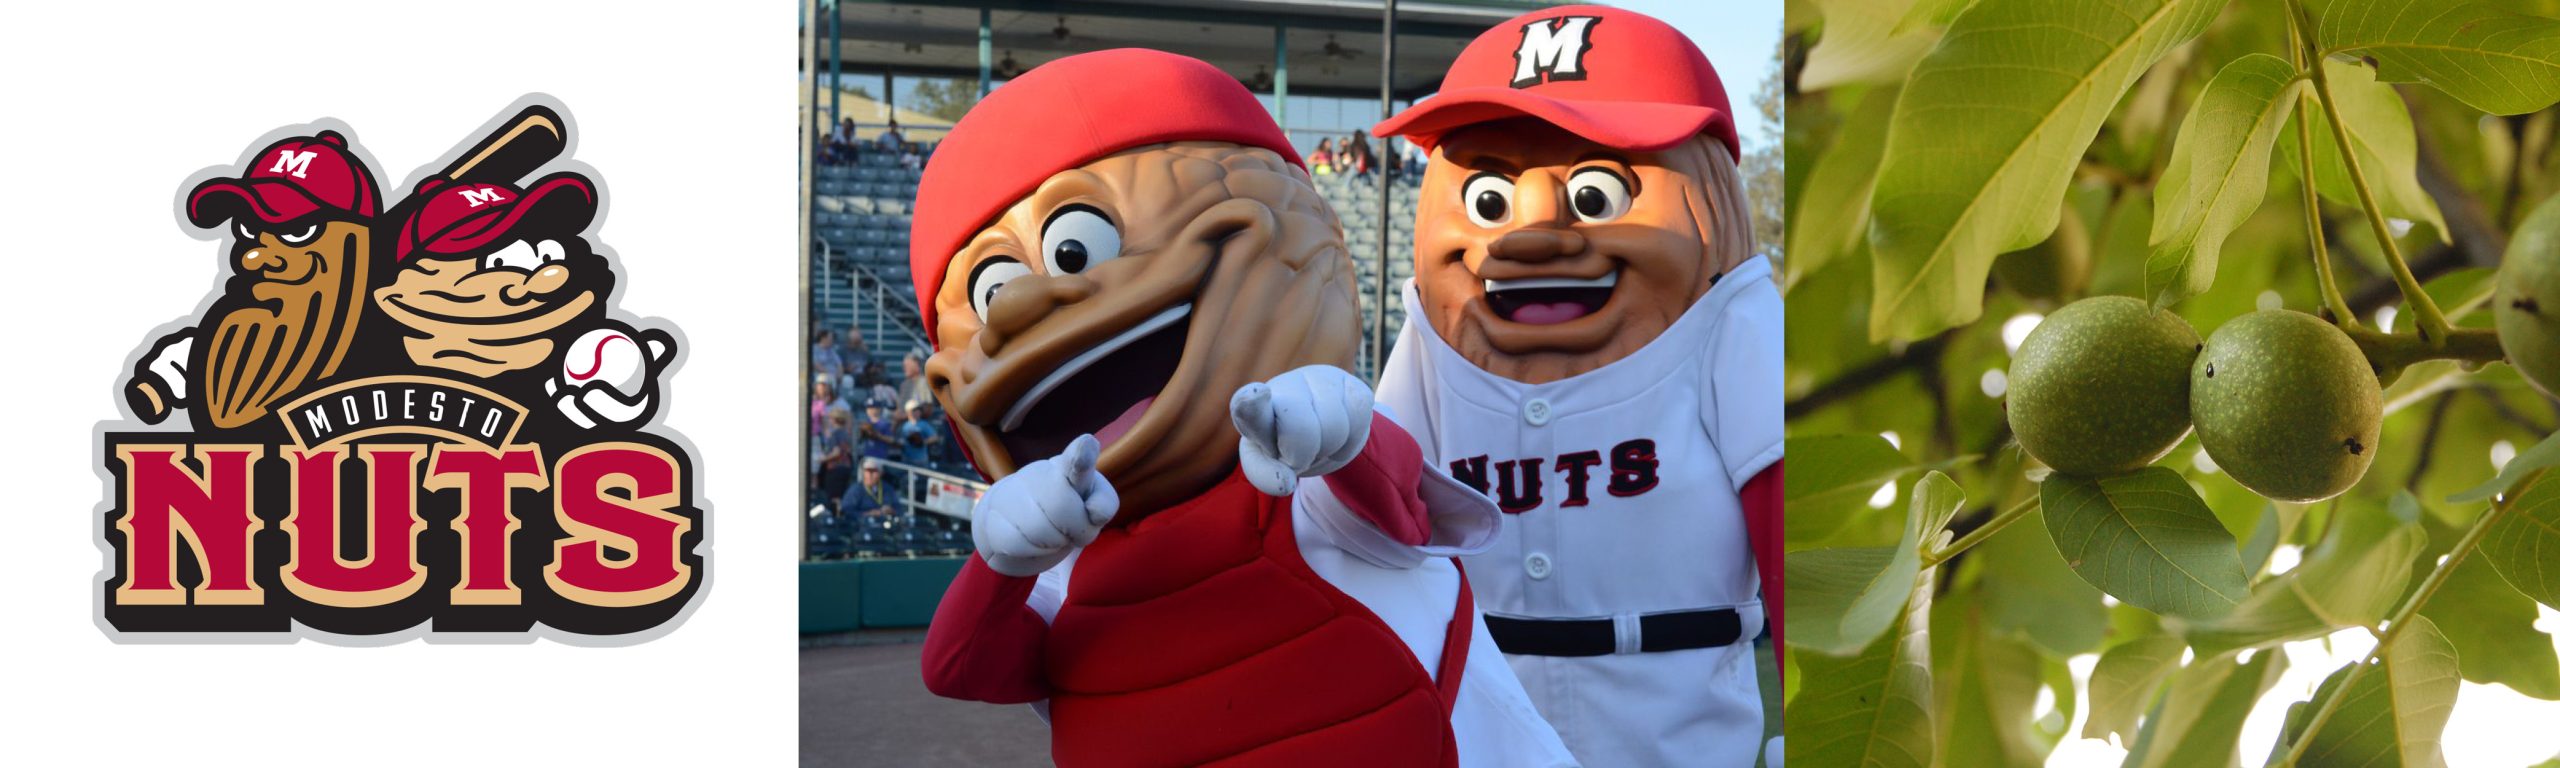 Logo and mascots of the Modesto Nuts. Right: Whole fruit of the English walnut (Juglans regia), one of the more commonly cultivated walnut species.